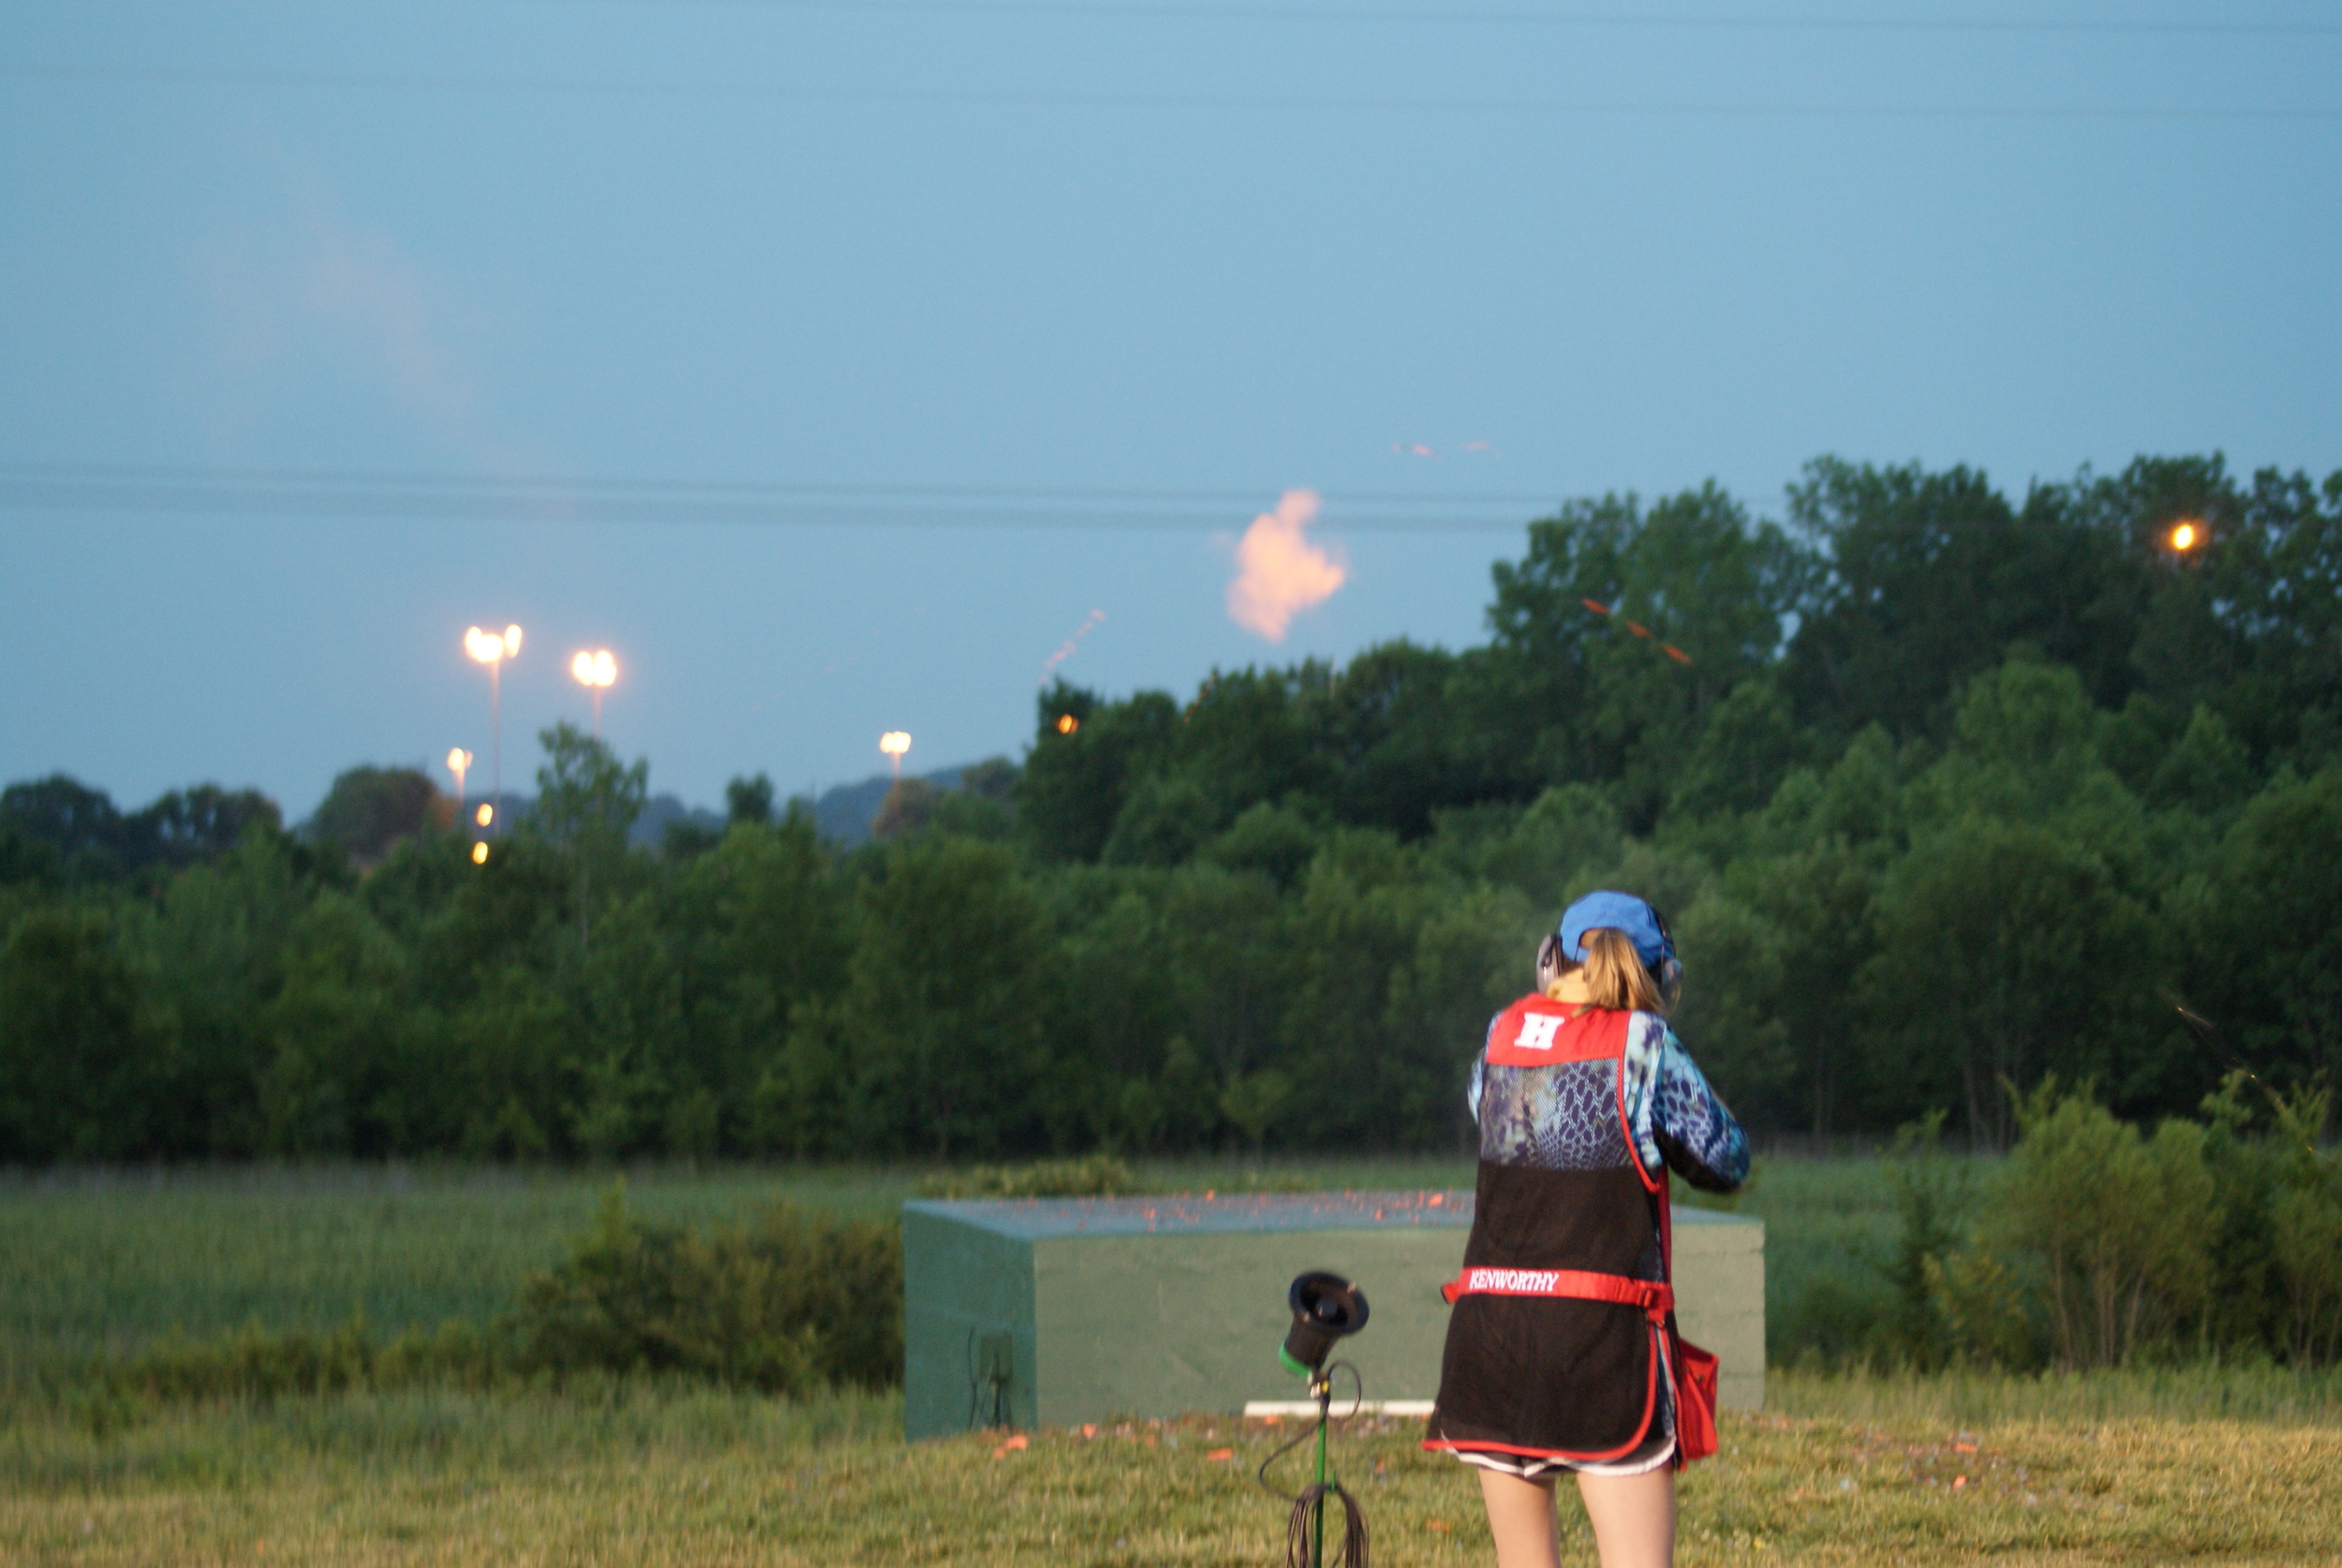 Brooke Kenworthy smashes a target under the lights in a shootoff for 3rd place.